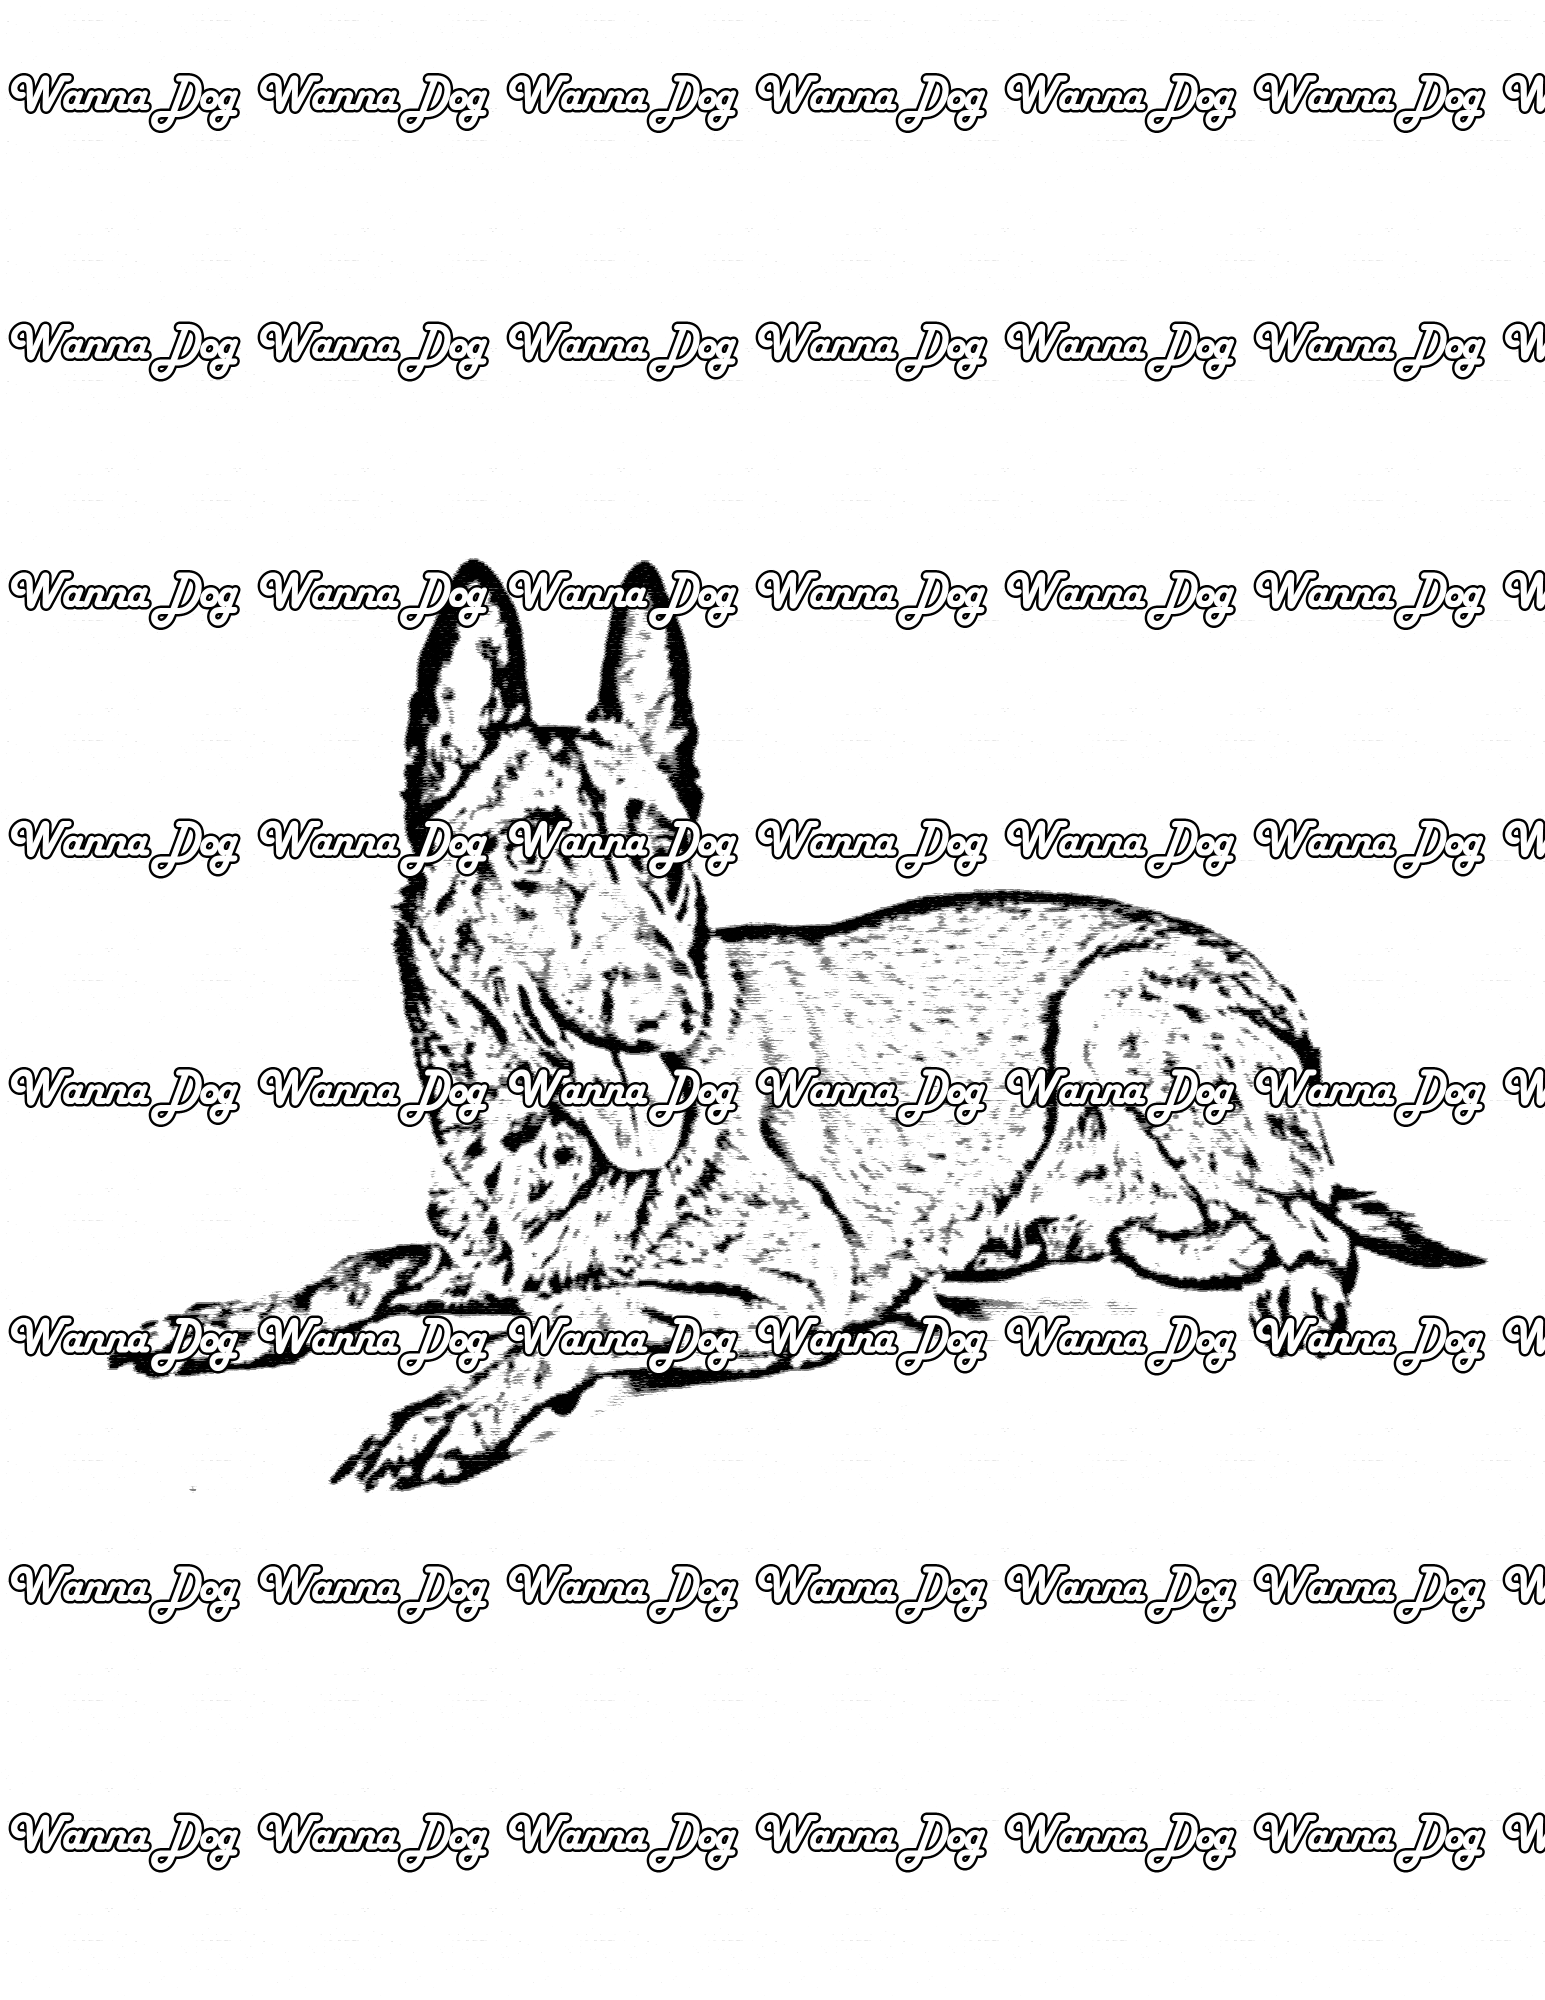 Belgian Malinois Coloring Page of a Belgian Malinois laying down with their tongue out